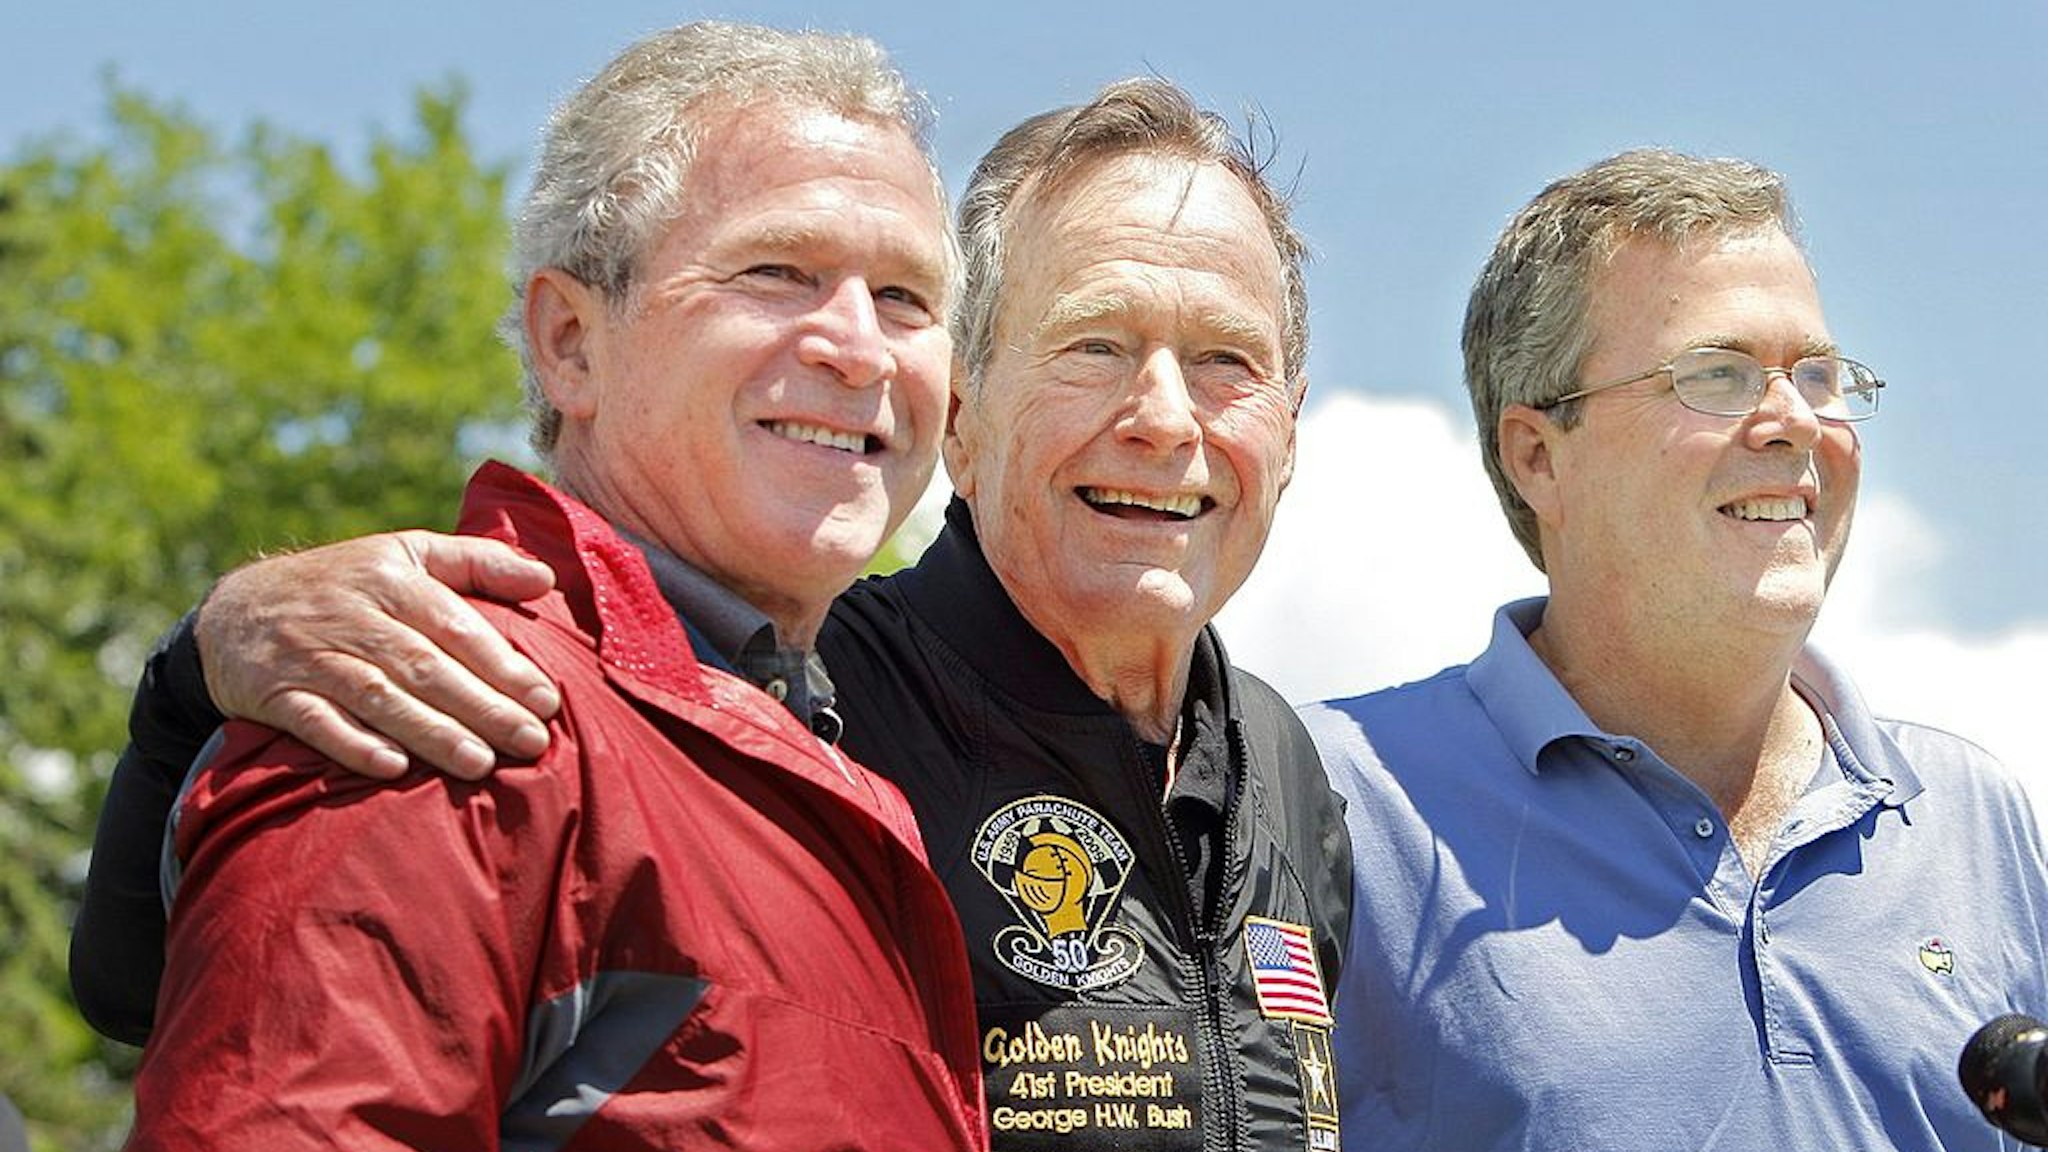 CORRECTION published Sunday, June 14, 2009: A photo cutline on Page A11 Saturday should have said former President George H. W. Bush poses with his sons former President George W. Bush and Jeb Bush. It was a photographer's error. -- Gregory Rec/Staff Photographer: -- George H.W. Bush is flanked by his sons George W. Bush and (Neil Bush)* after completing a parachute jump in Kennebunkport on Friday, June 12, 2009 for his 85th birthday. -- Correct id: JEB BUSH* (Photo by Gregory Rec/Portland Press Herald via Getty Images)